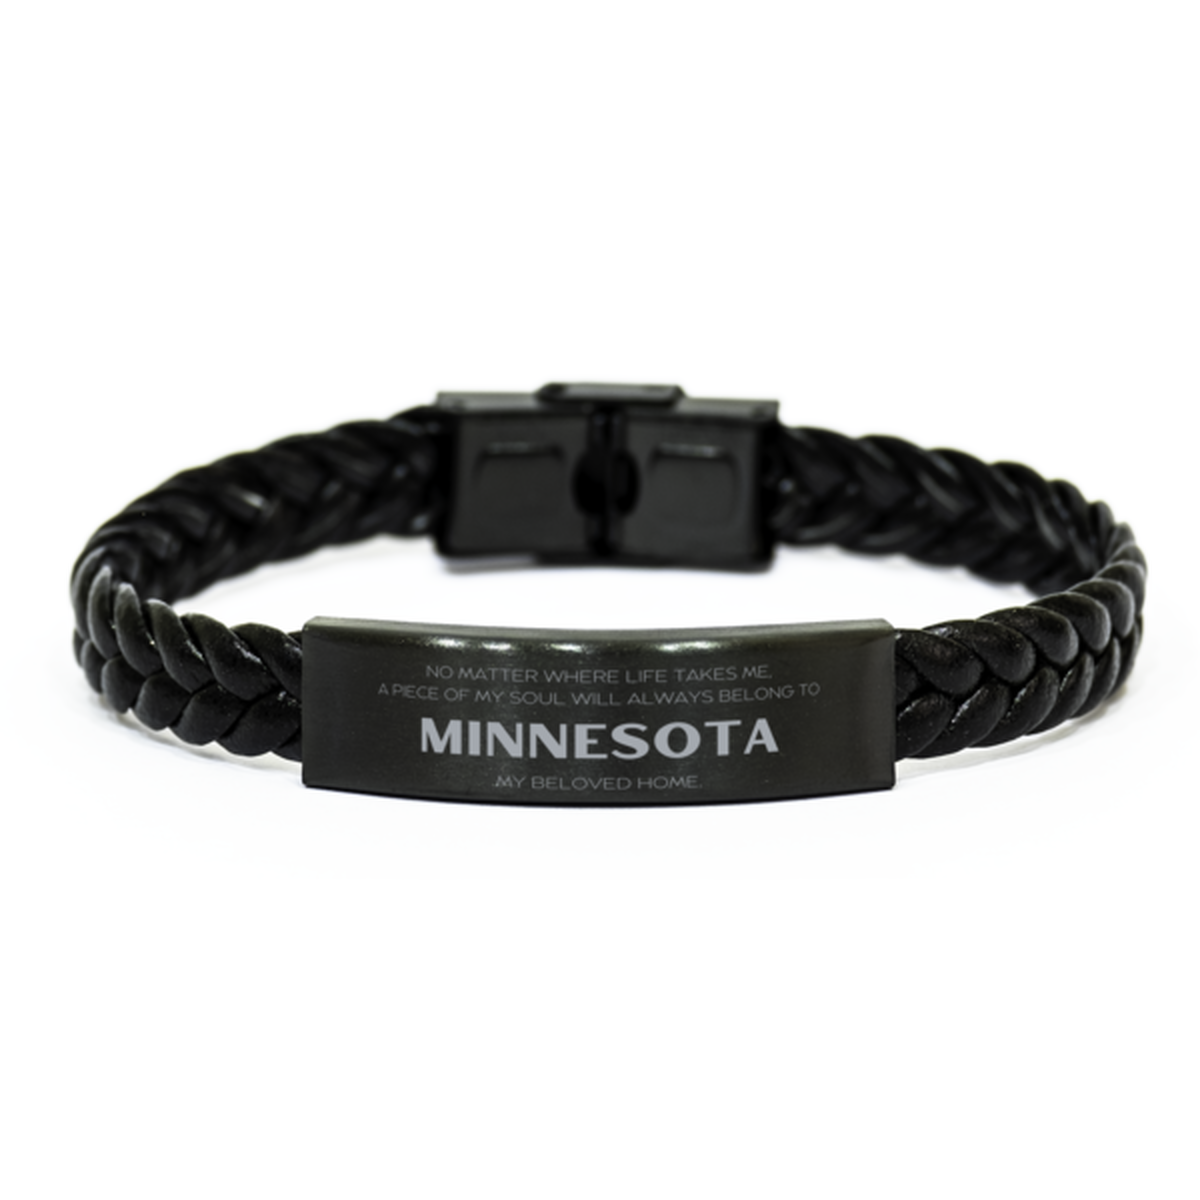 Love Minnesota State Gifts, My soul will always belong to Minnesota, Proud Braided Leather Bracelet, Birthday Unique Gifts For Minnesota Men, Women, Friends